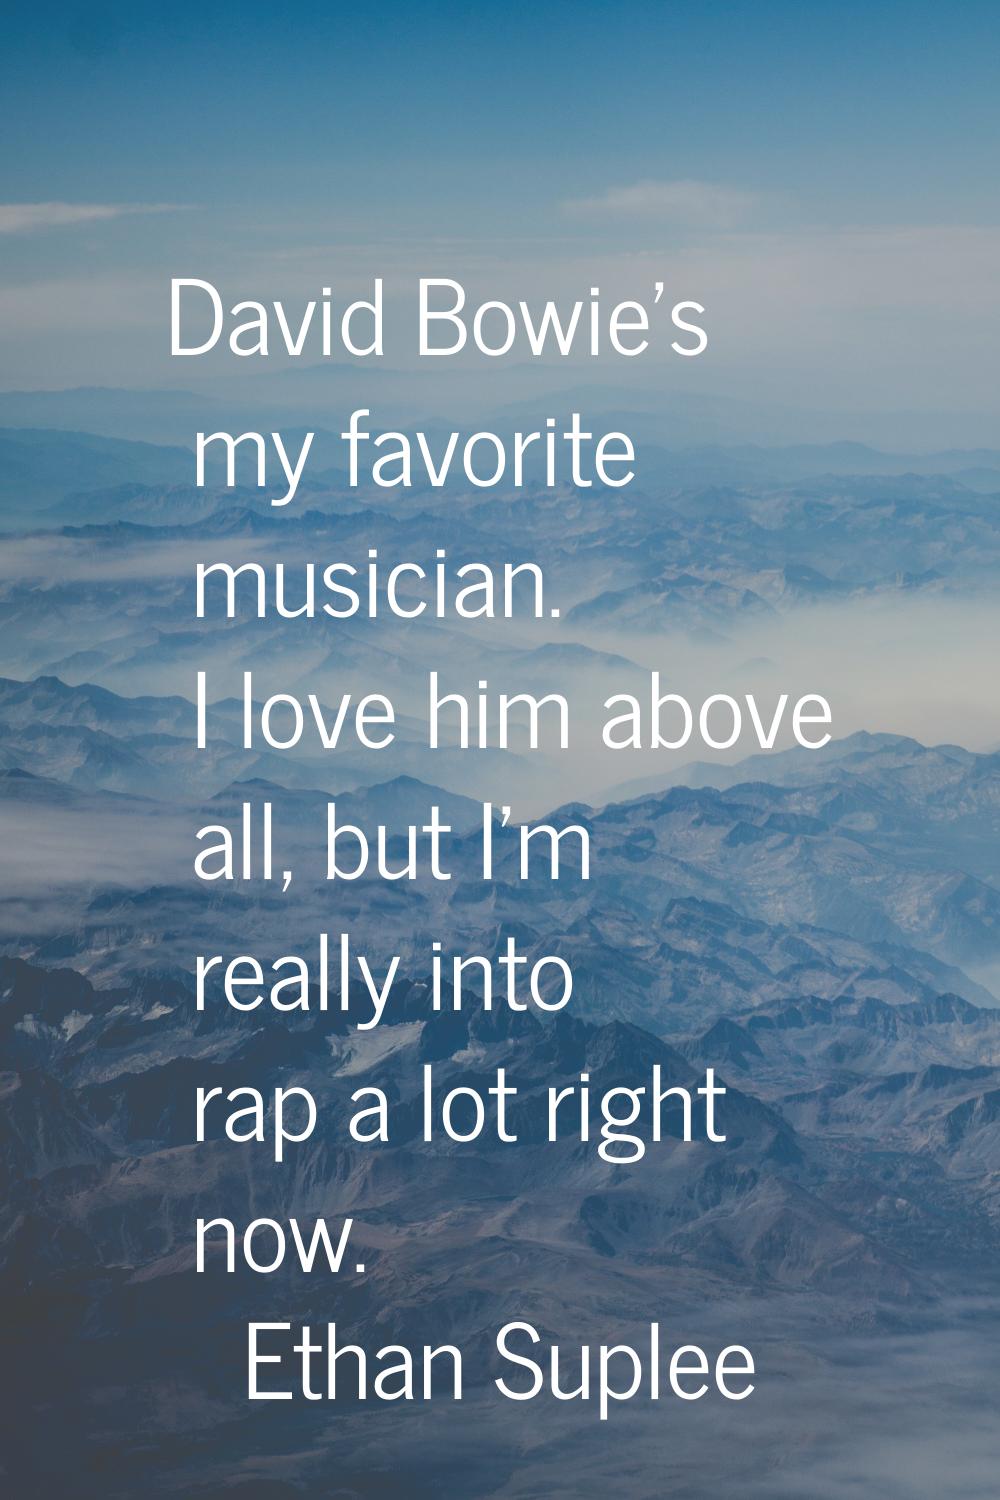 David Bowie's my favorite musician. I love him above all, but I'm really into rap a lot right now.